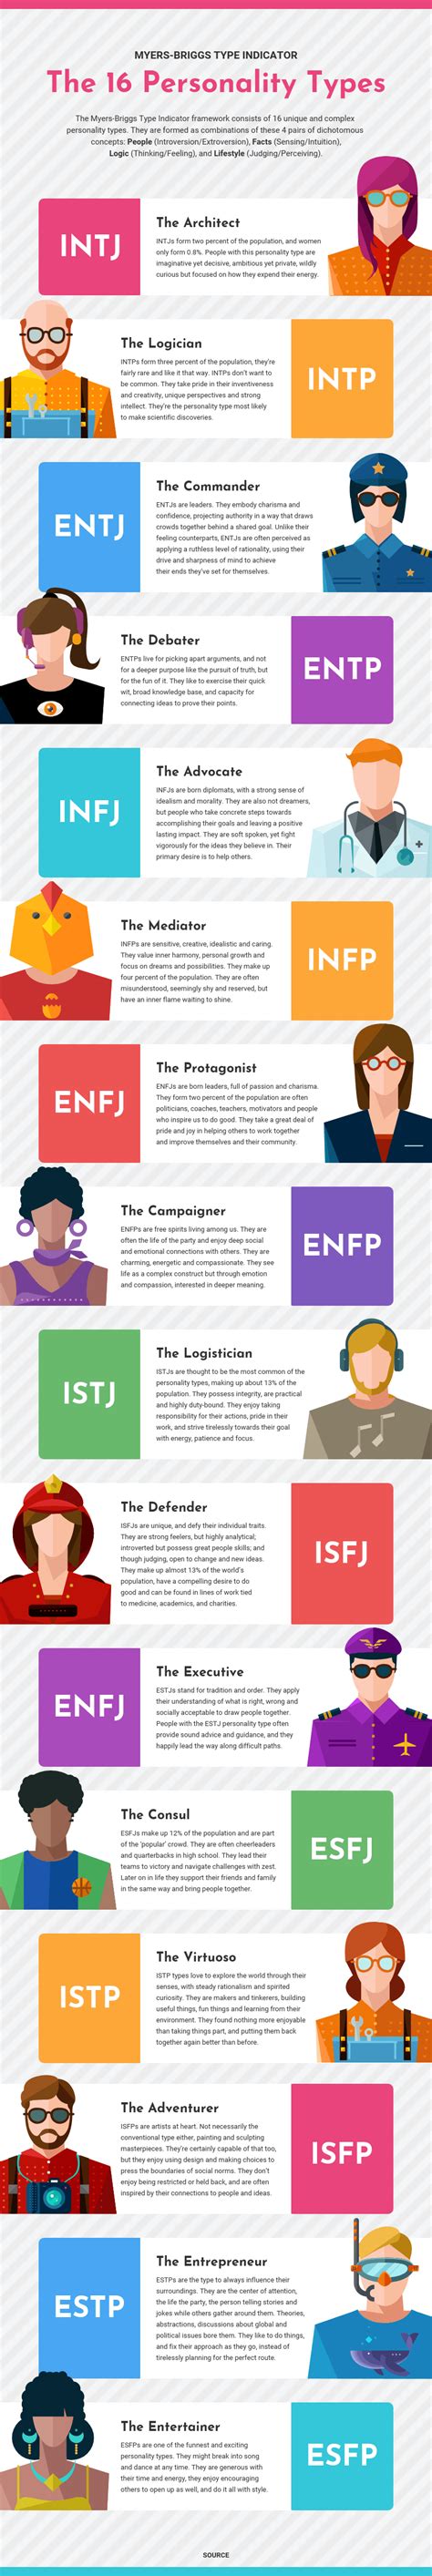 Meyers Briggs Personality Types Ideas In Personality Types